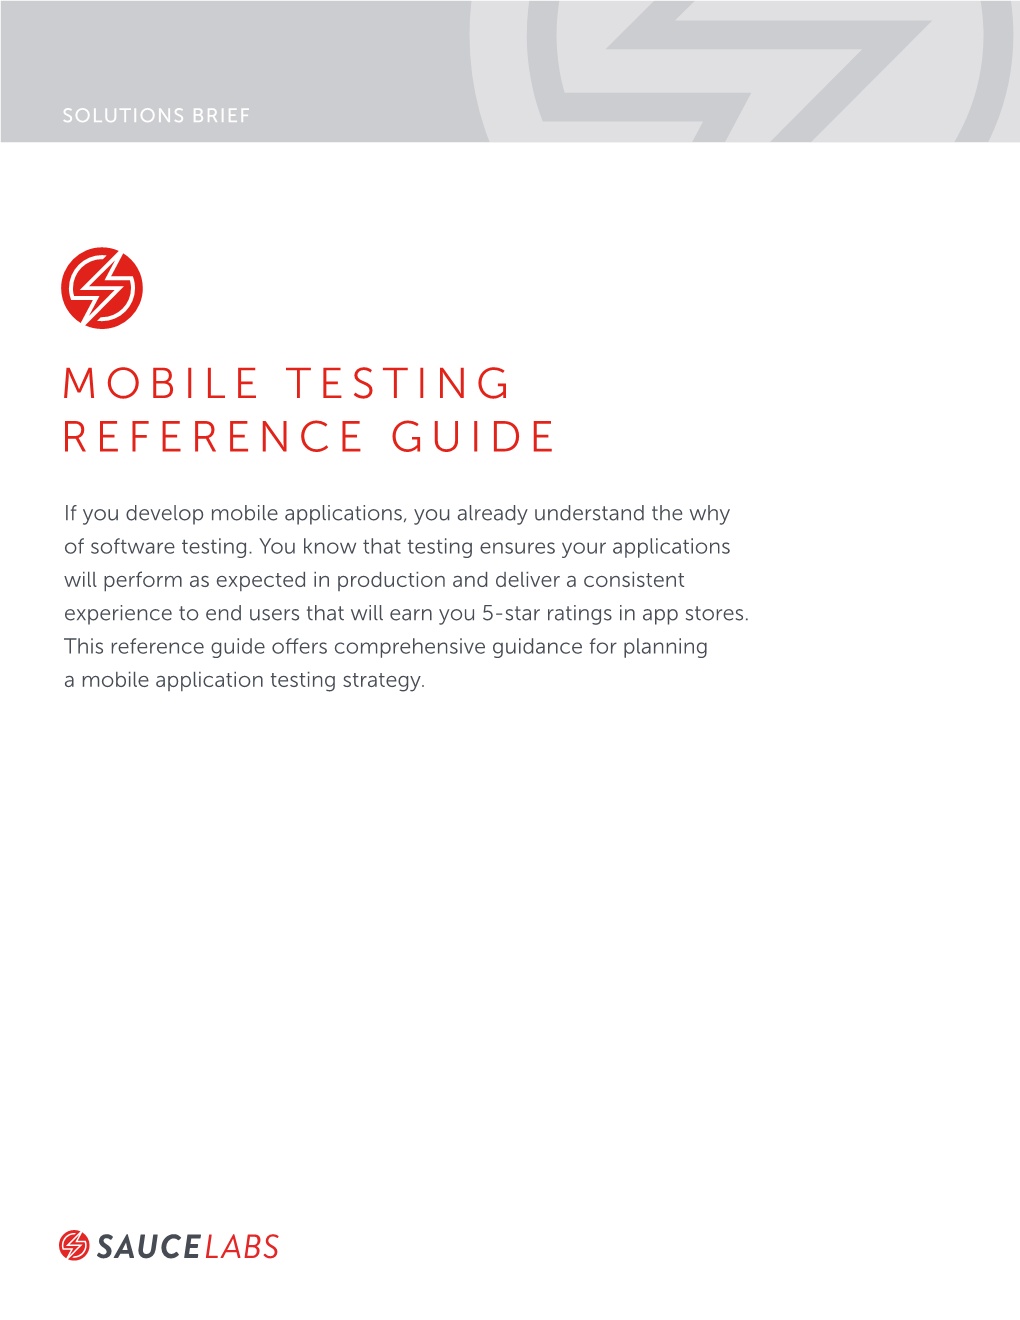 Mobile Testing Reference Guide